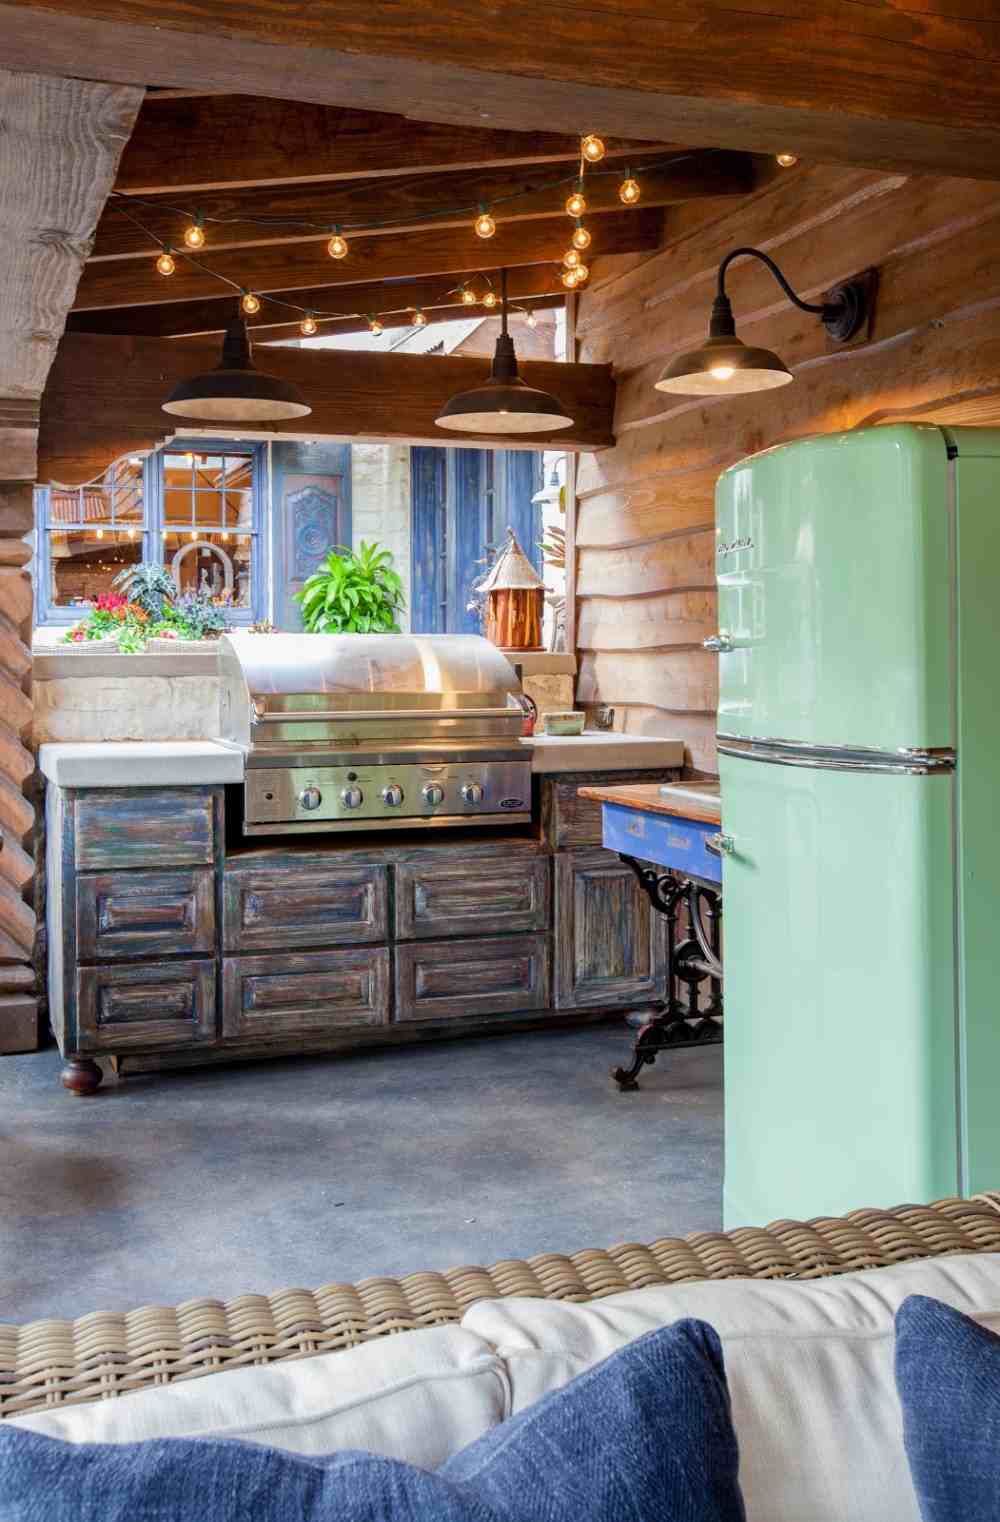 vintage look garden furniture and retro style refrigerator in green combine for rustic atmosphere